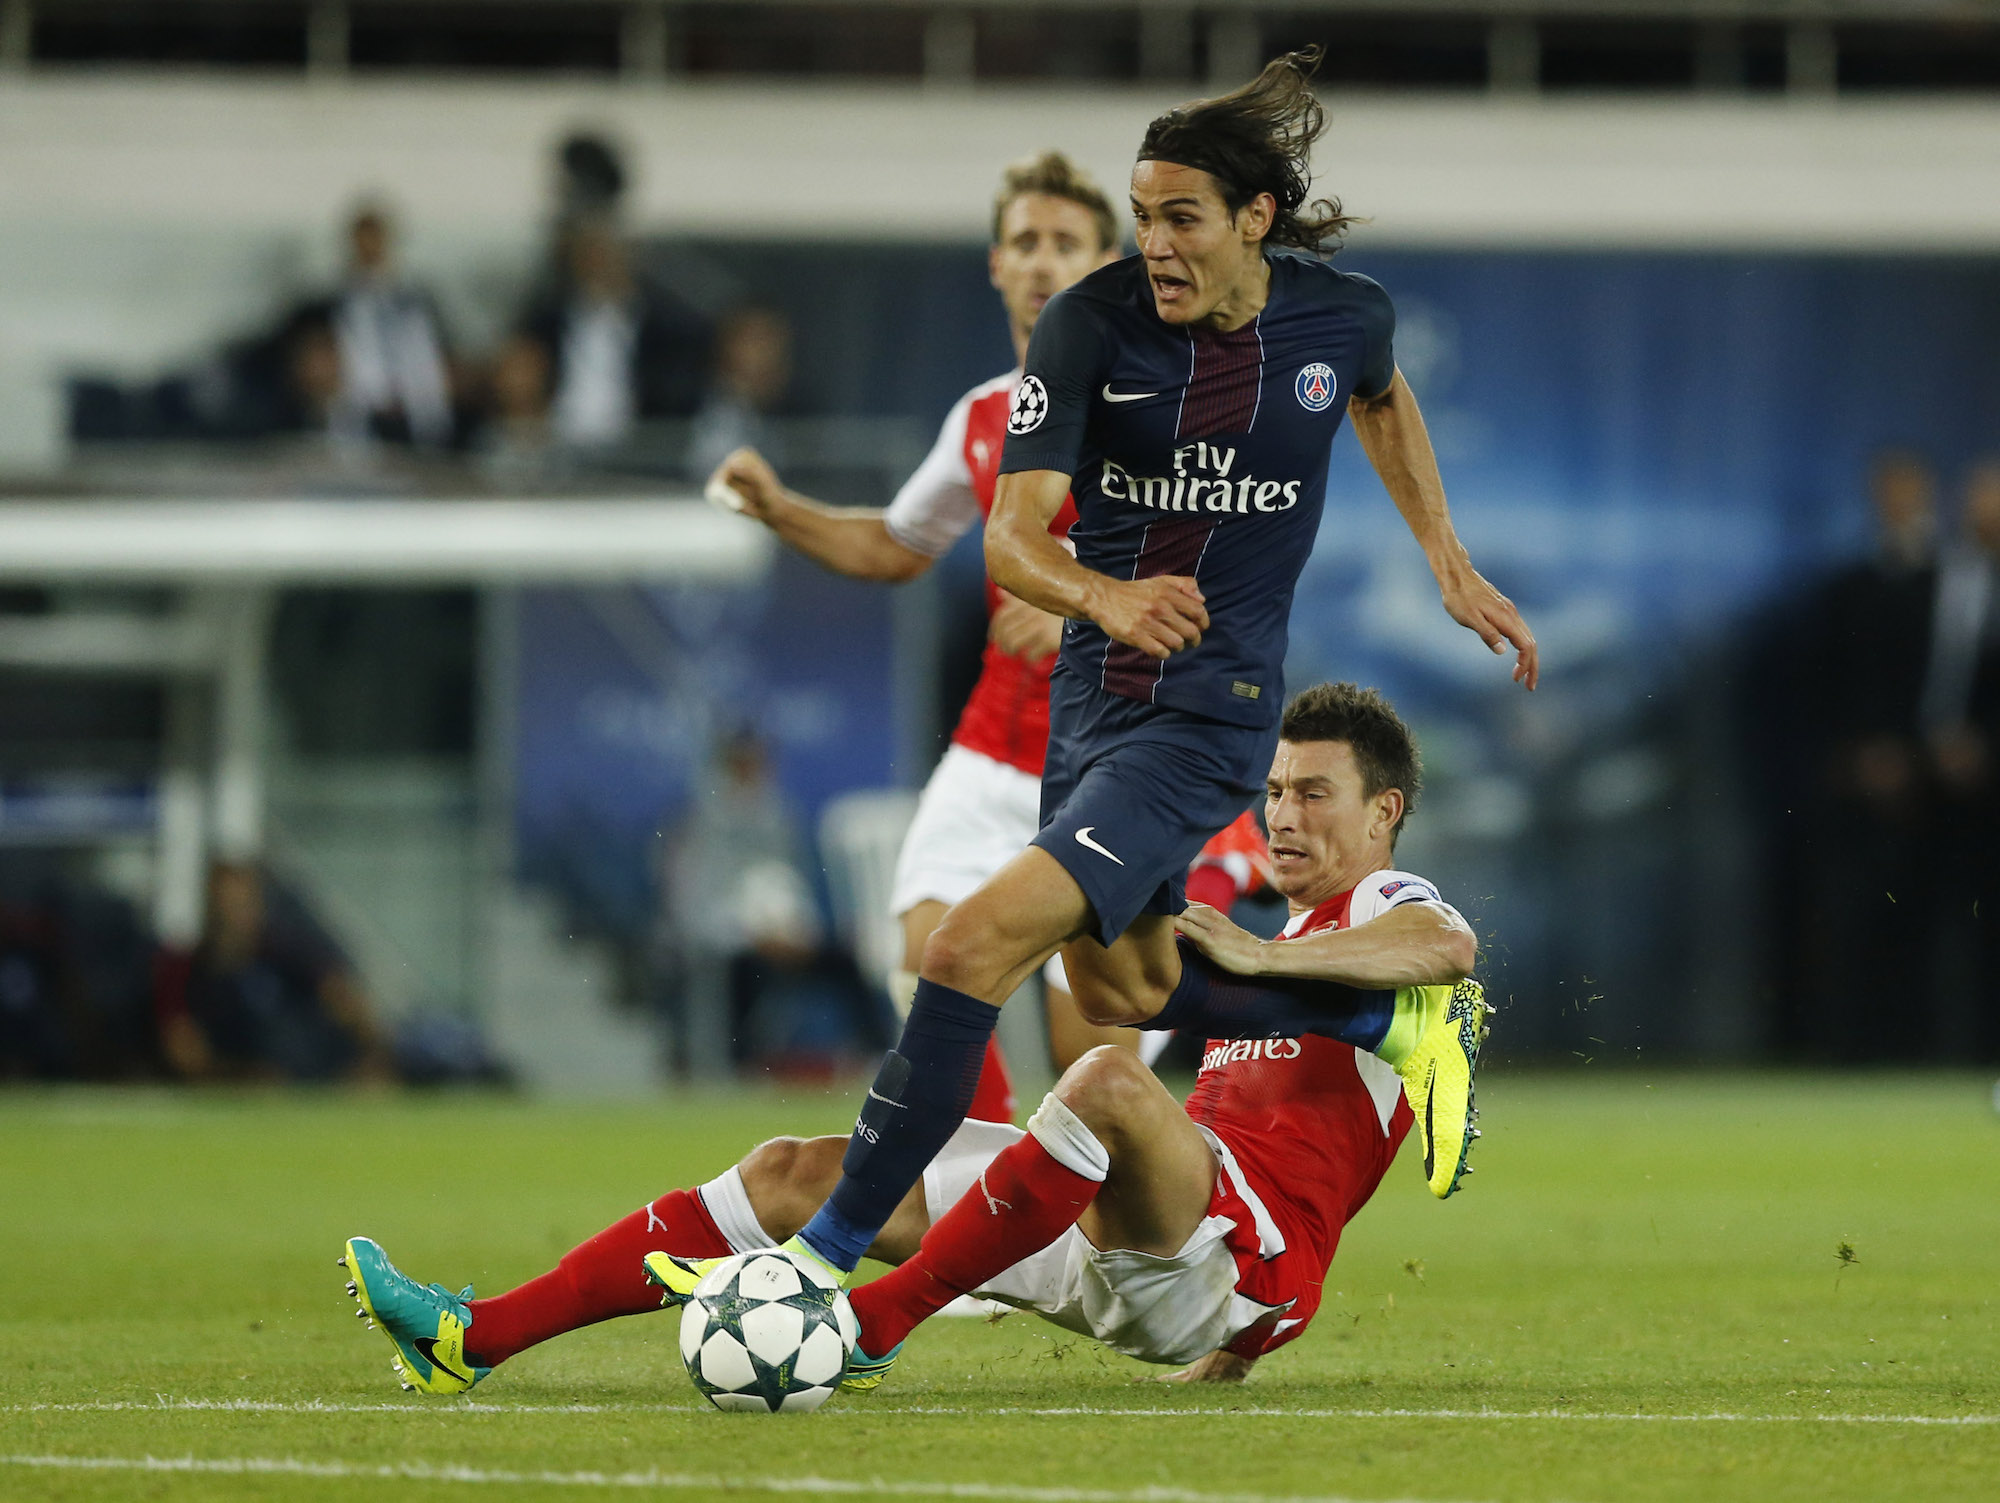 Football Soccer - Paris Saint-Germain v Arsenal - UEFA Champions League Group Stage - Group A - Parc des Princes, Paris, France - 13/9/16 Paris Saint-Germain's Edinson Cavani in action with Arsenal's Laurent Koscielny Reuters / Benoit Tessier Livepic EDITORIAL USE ONLY.